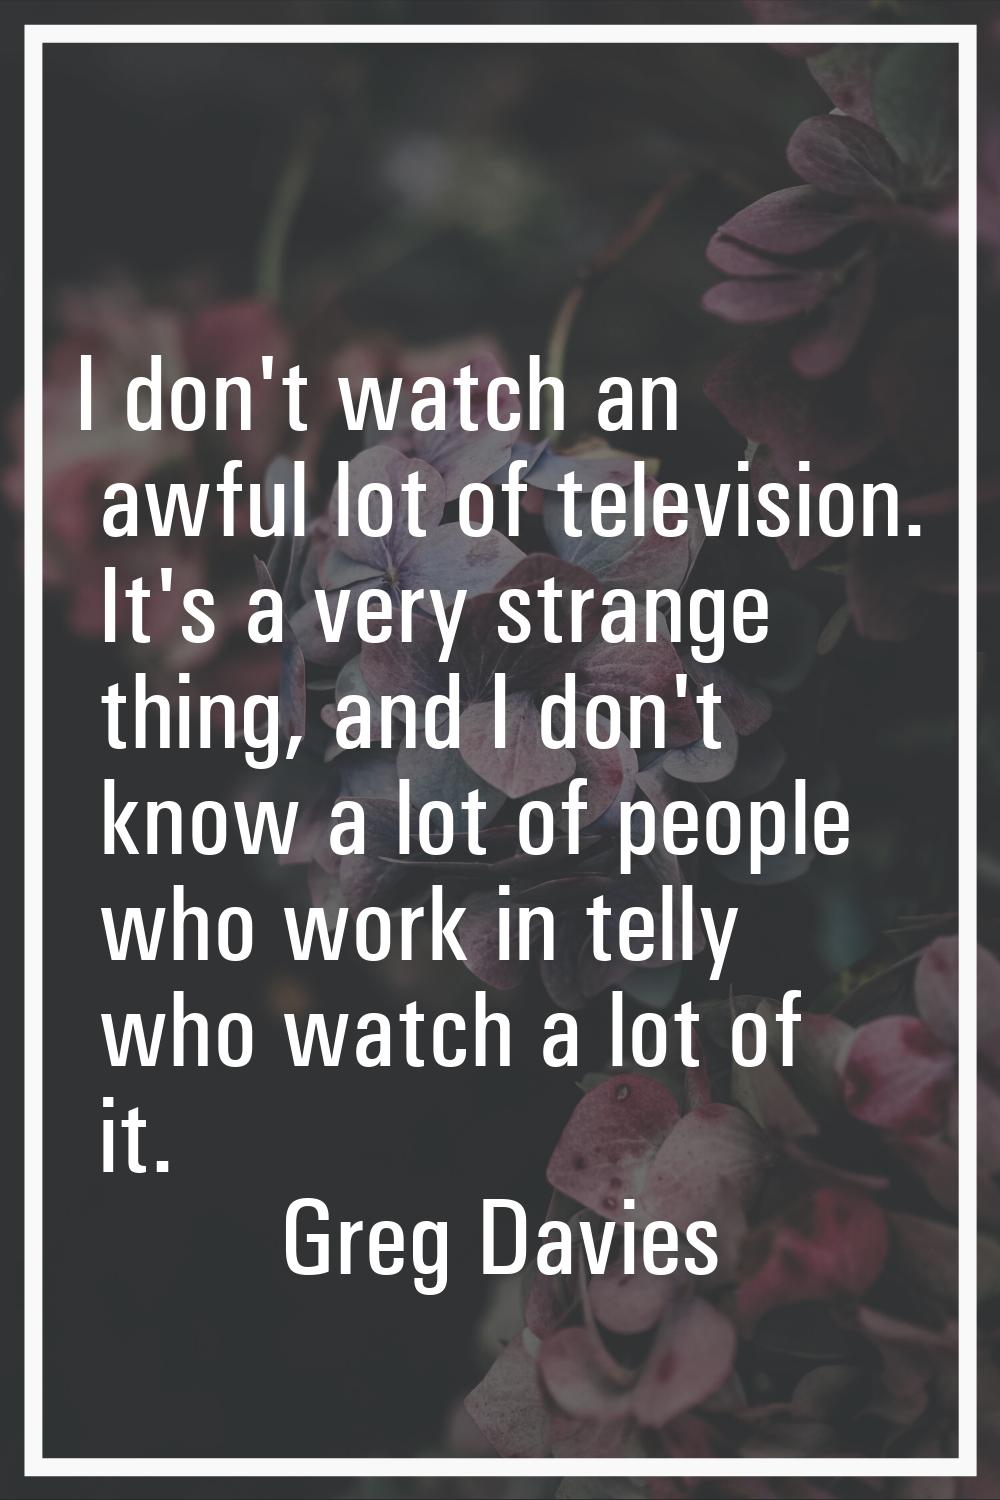 I don't watch an awful lot of television. It's a very strange thing, and I don't know a lot of peop